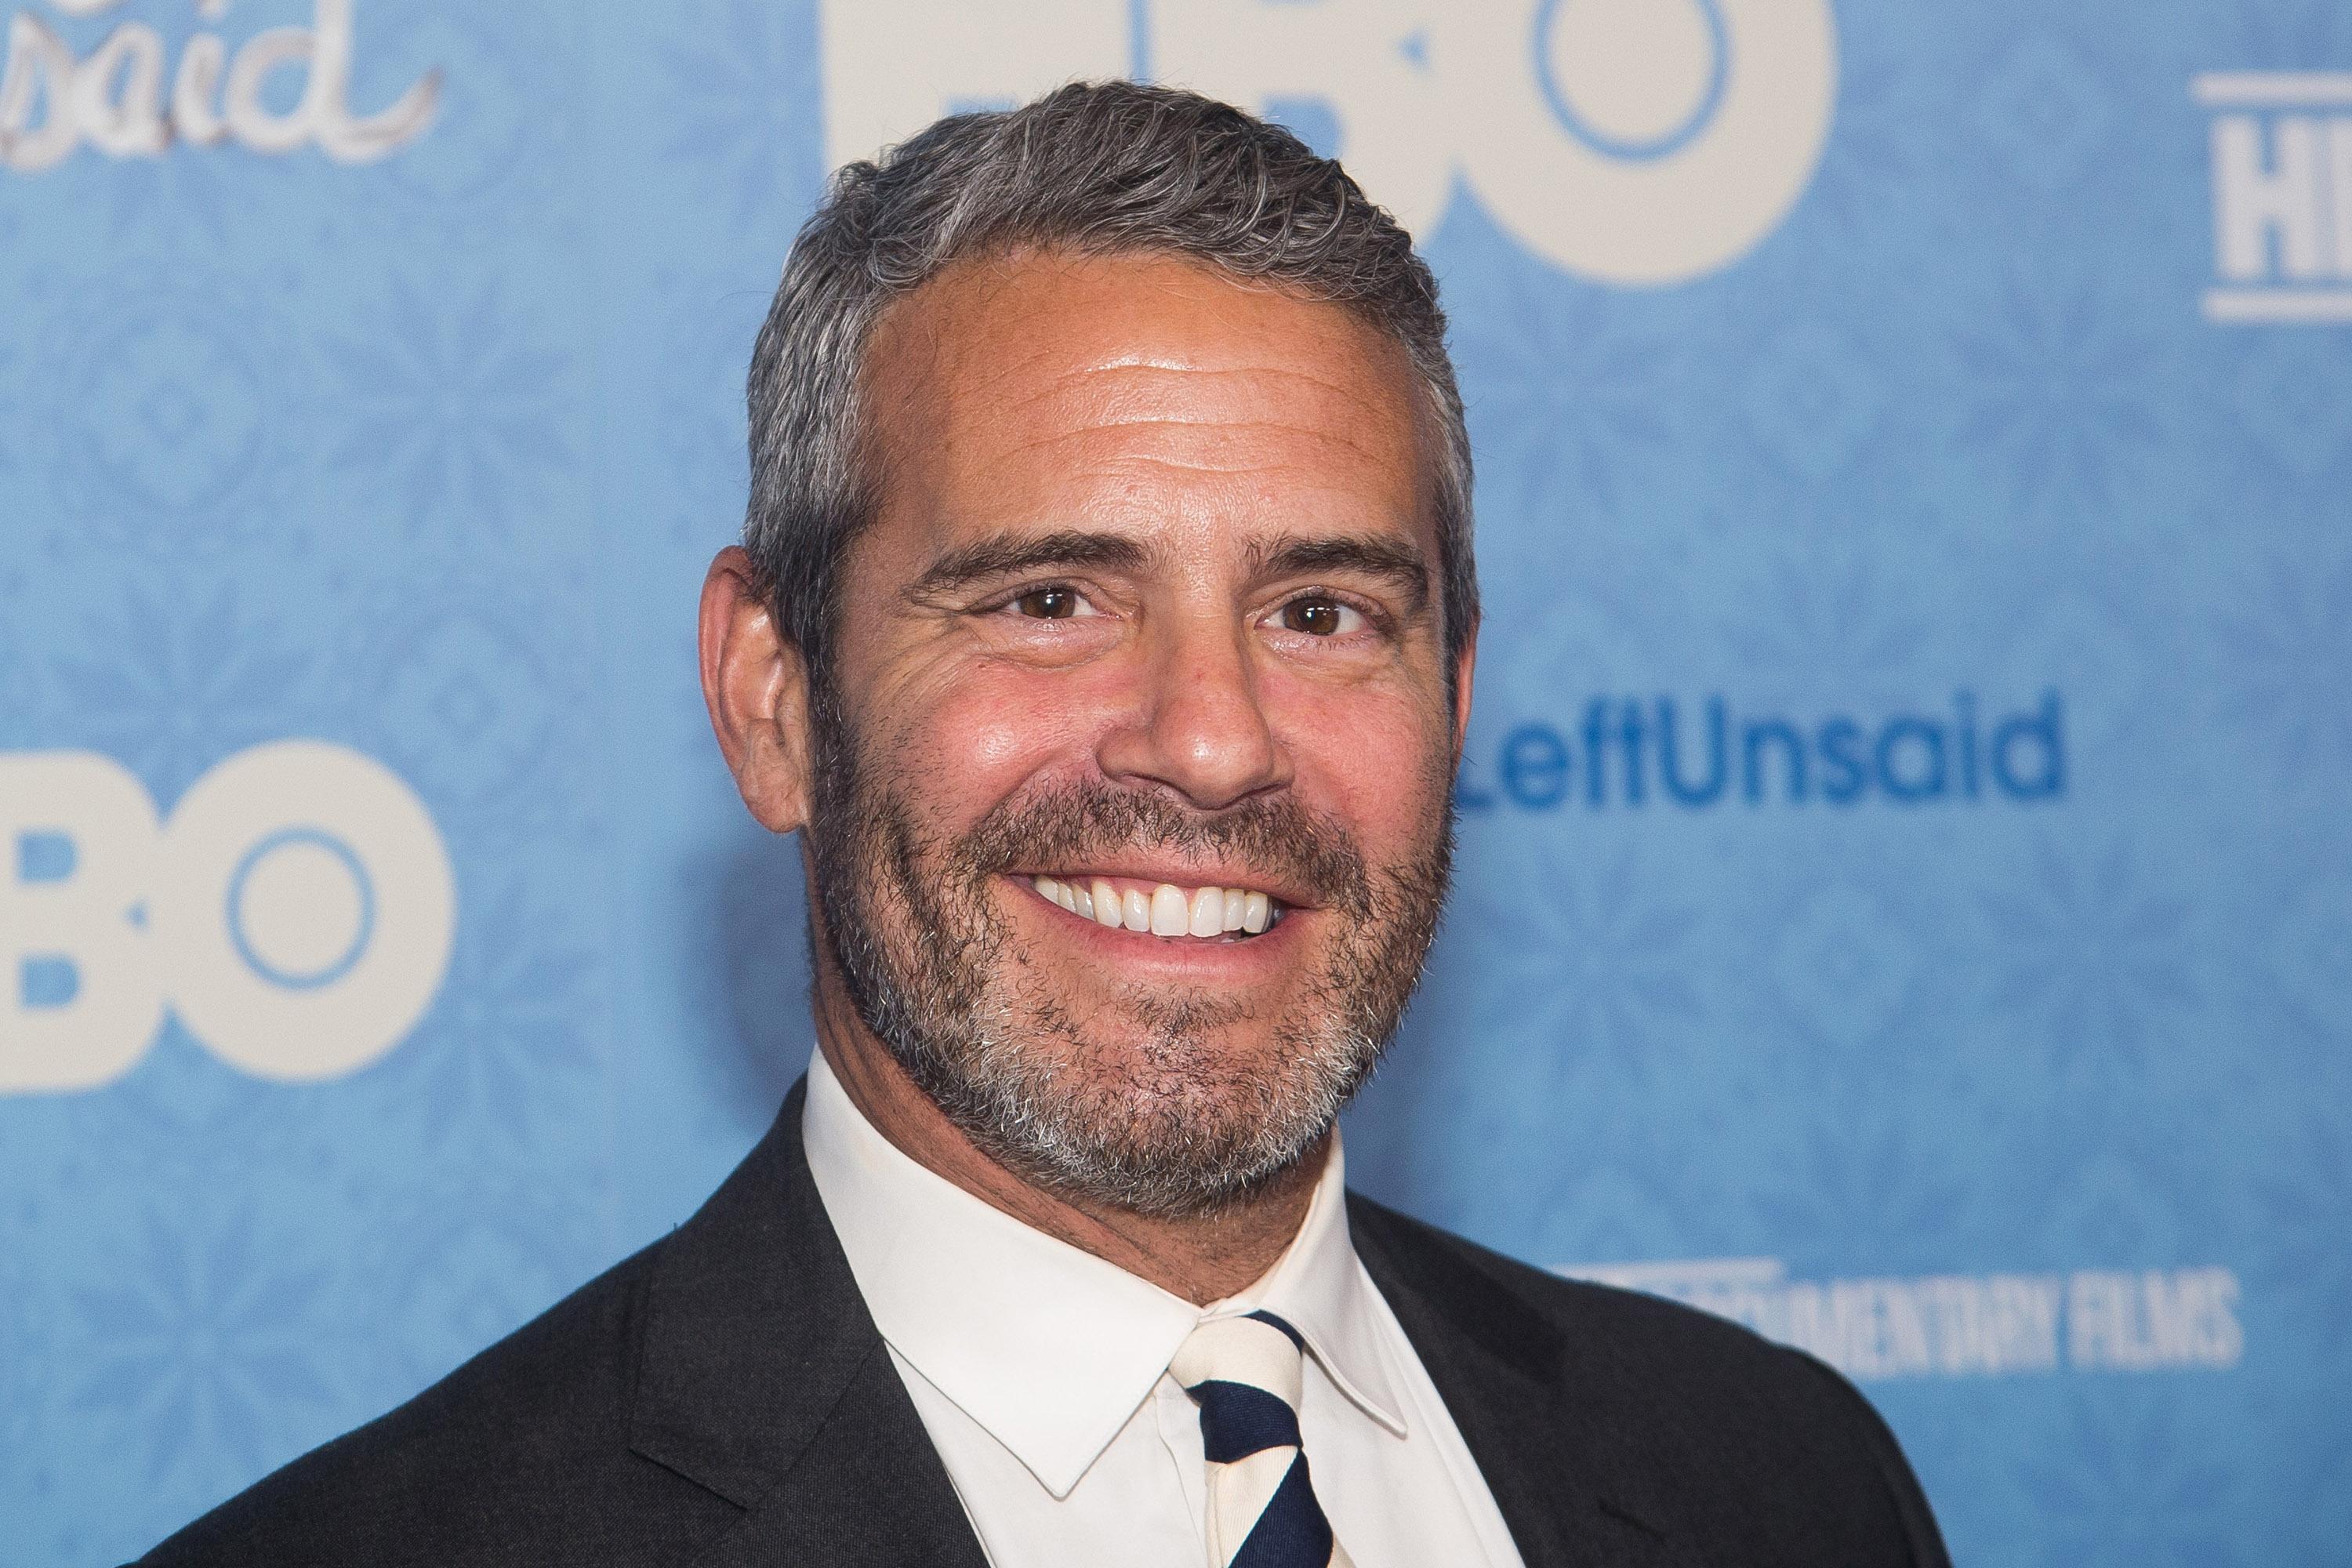 Andy Cohen Is Latest Celebrity With Own Book Imprint Washington Times Stori...